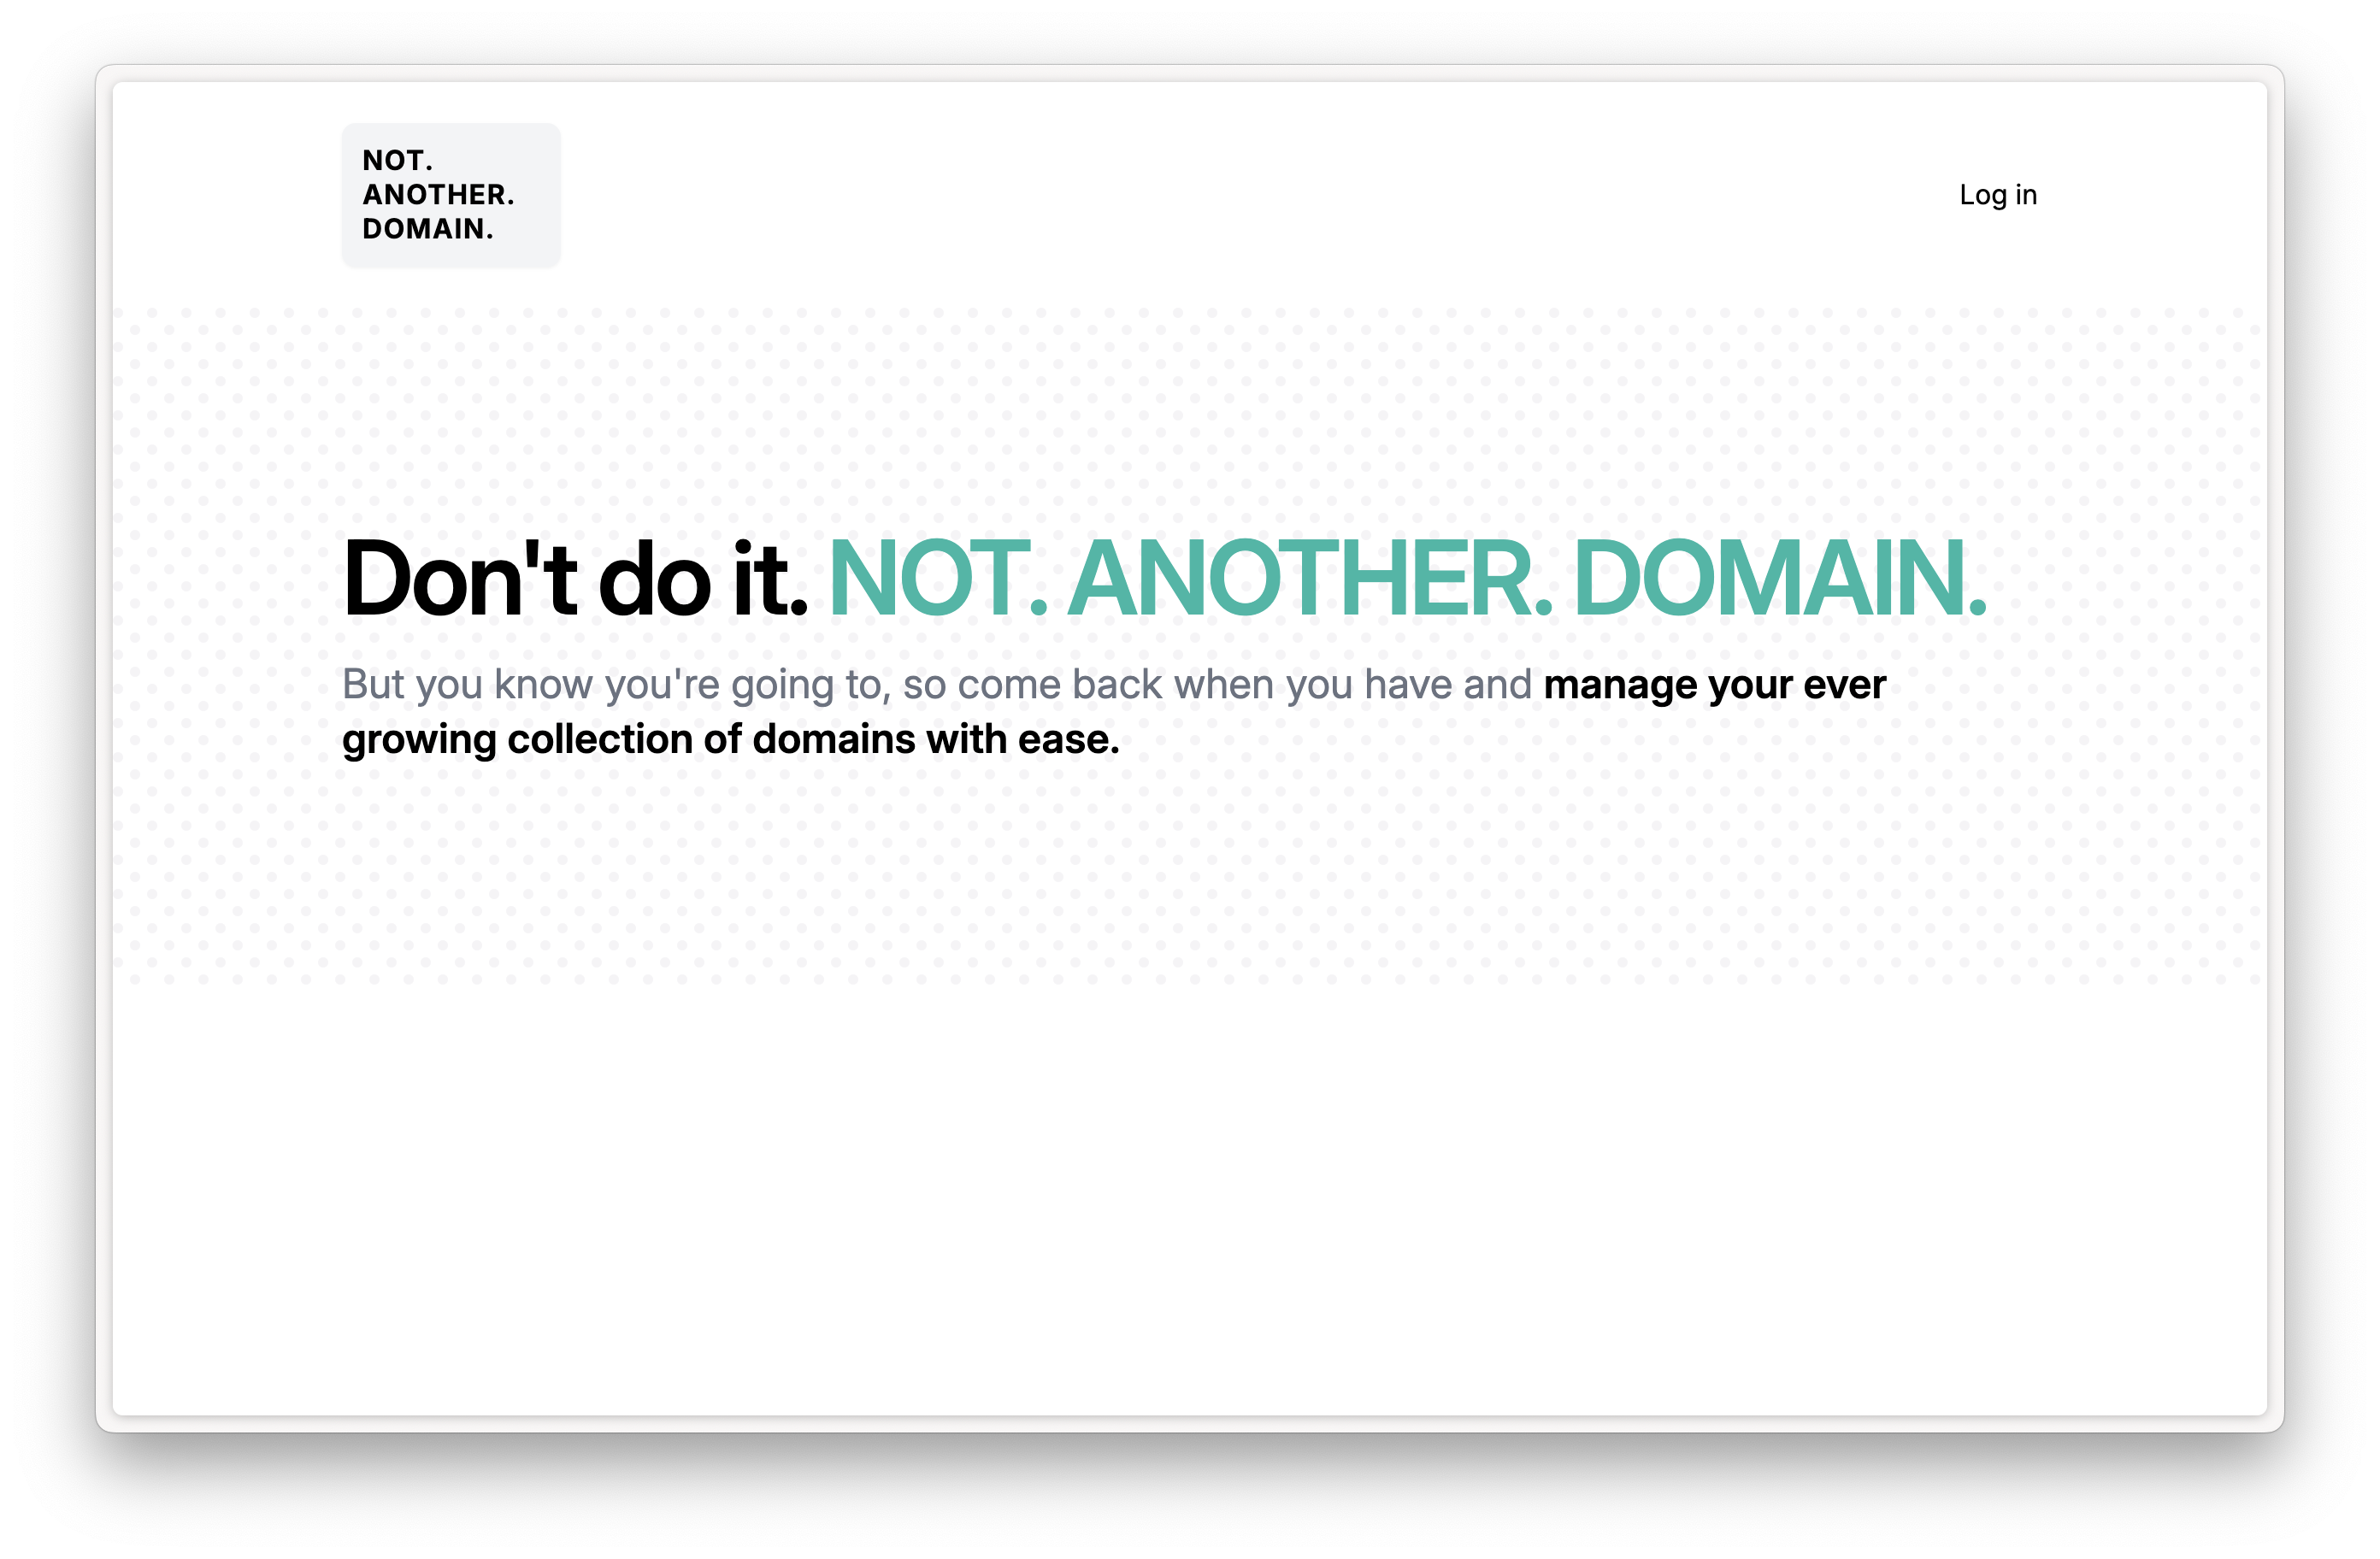 Image for notanotherdomain.com